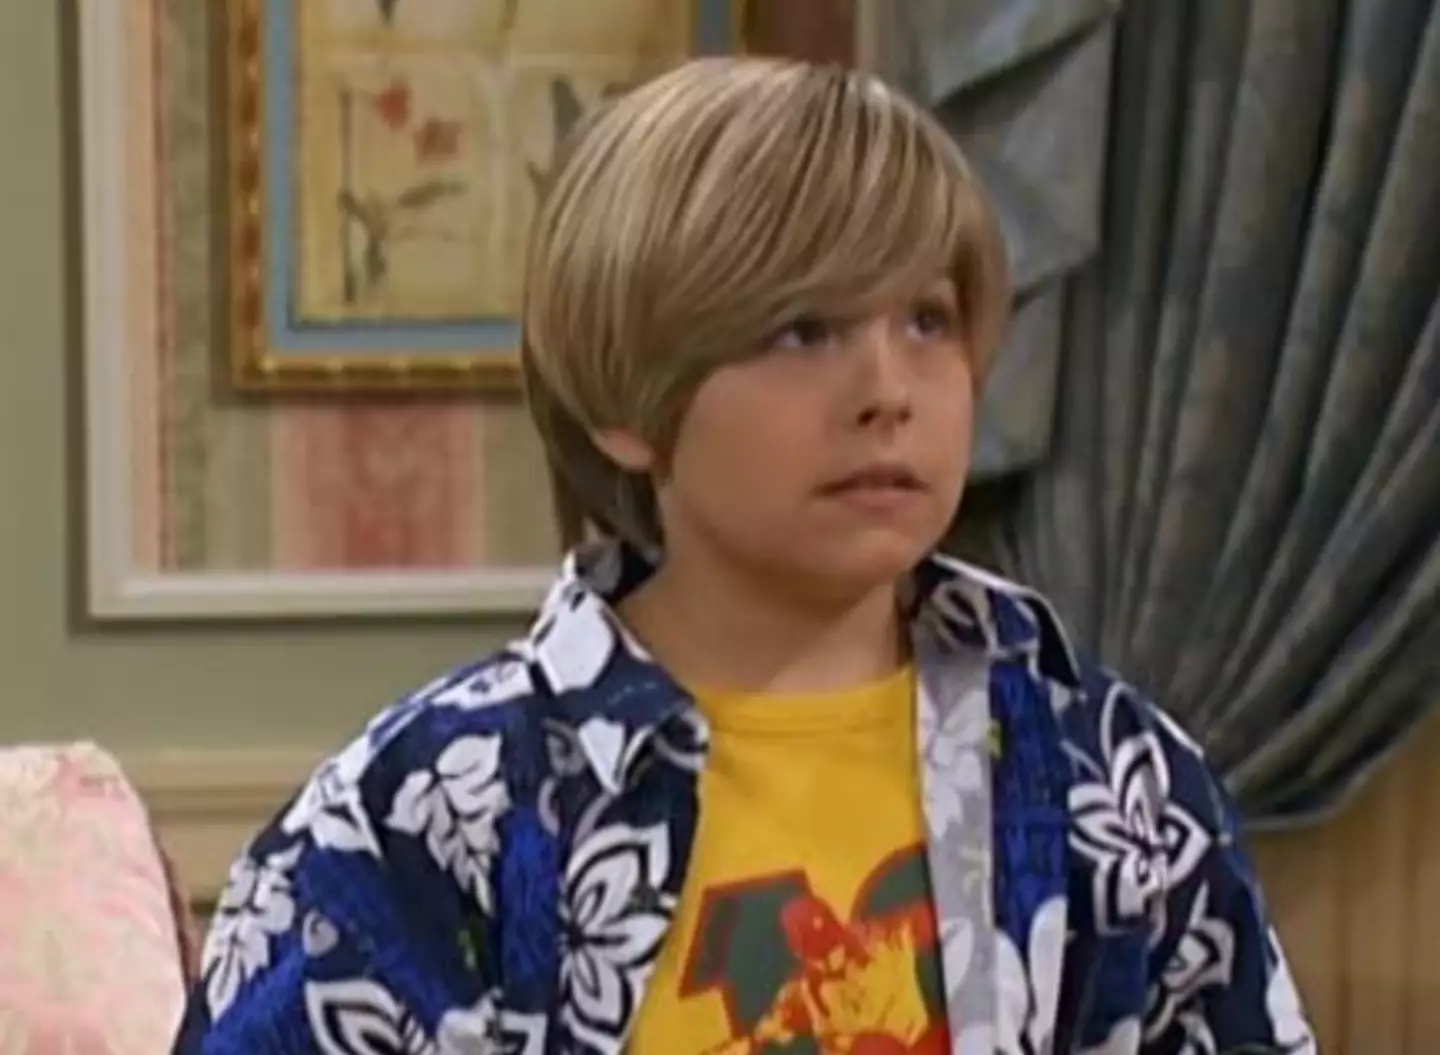 Dylan played Zack in The Suite Life of Zack and Cody.